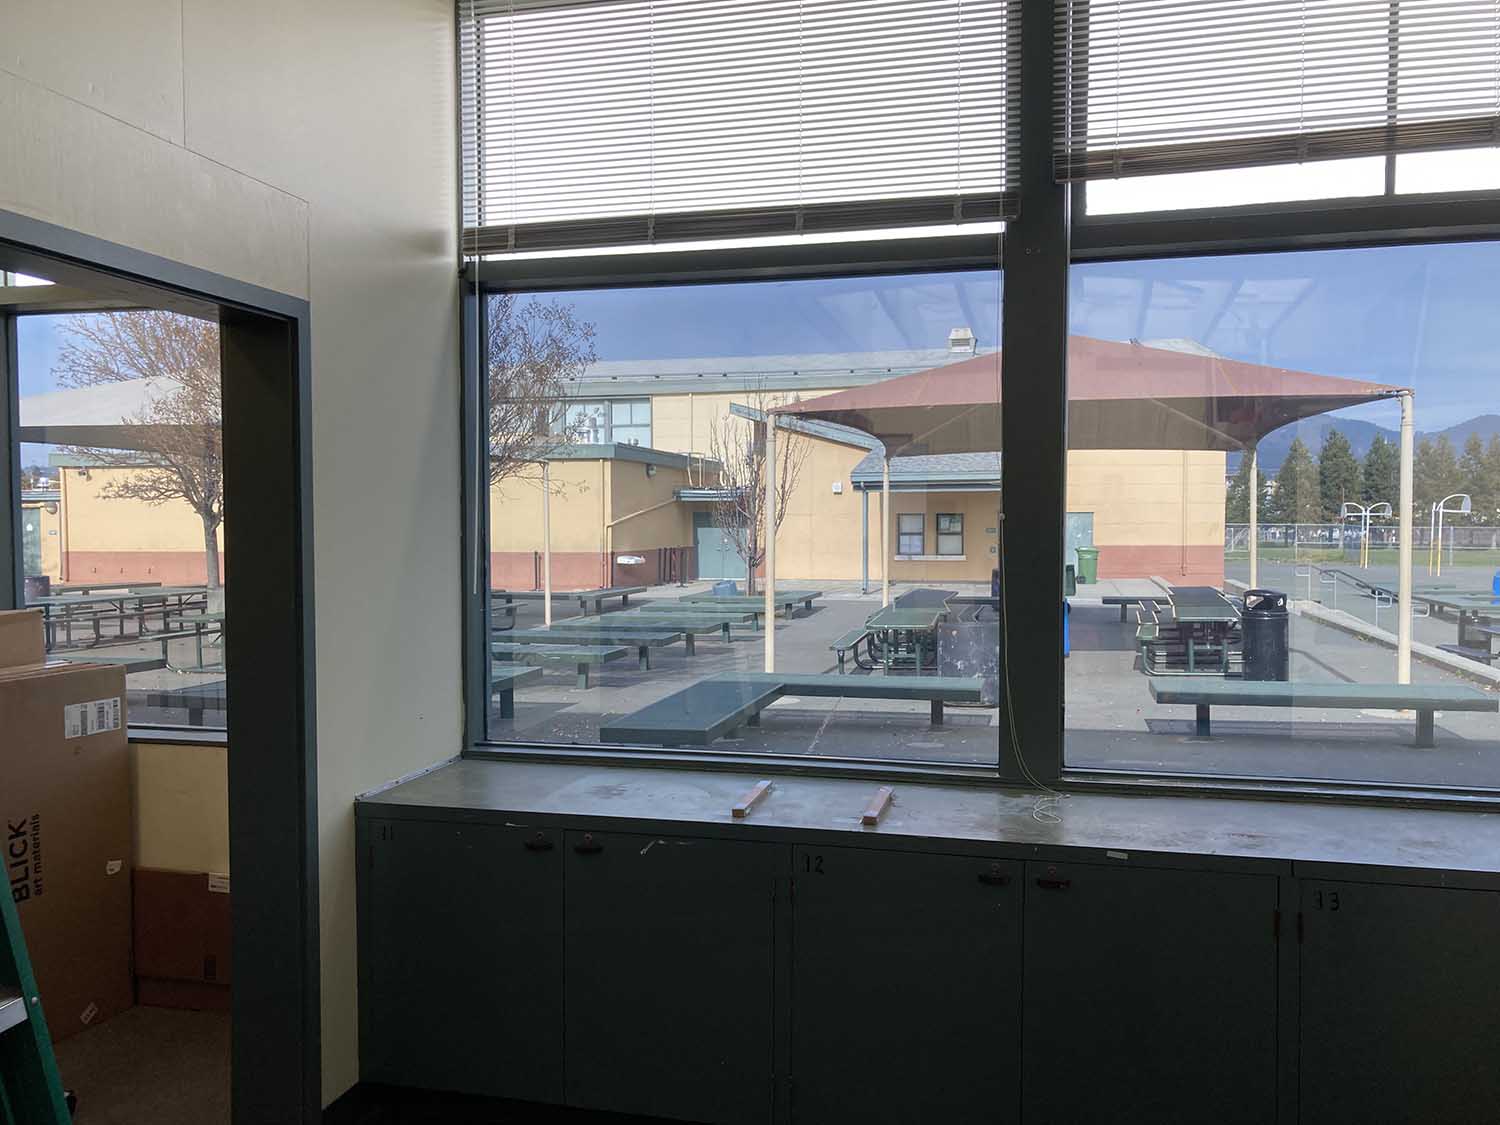 Window Film for a Middle School in San Rafael, CA, installed by ClimatePro, the San Francisco Bay Area Window Film Leader.